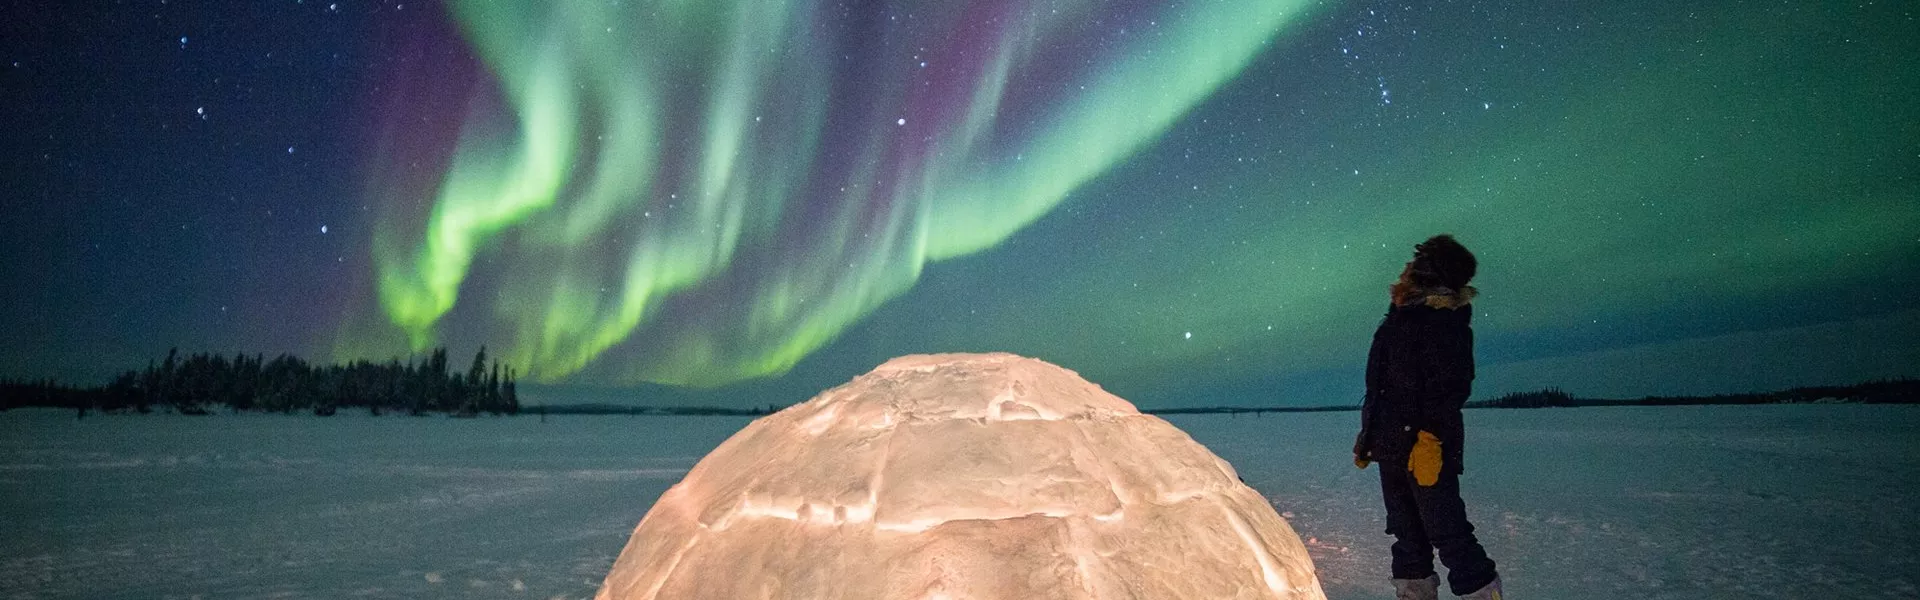 A person standing by an igloo and observing northern lights in Canada